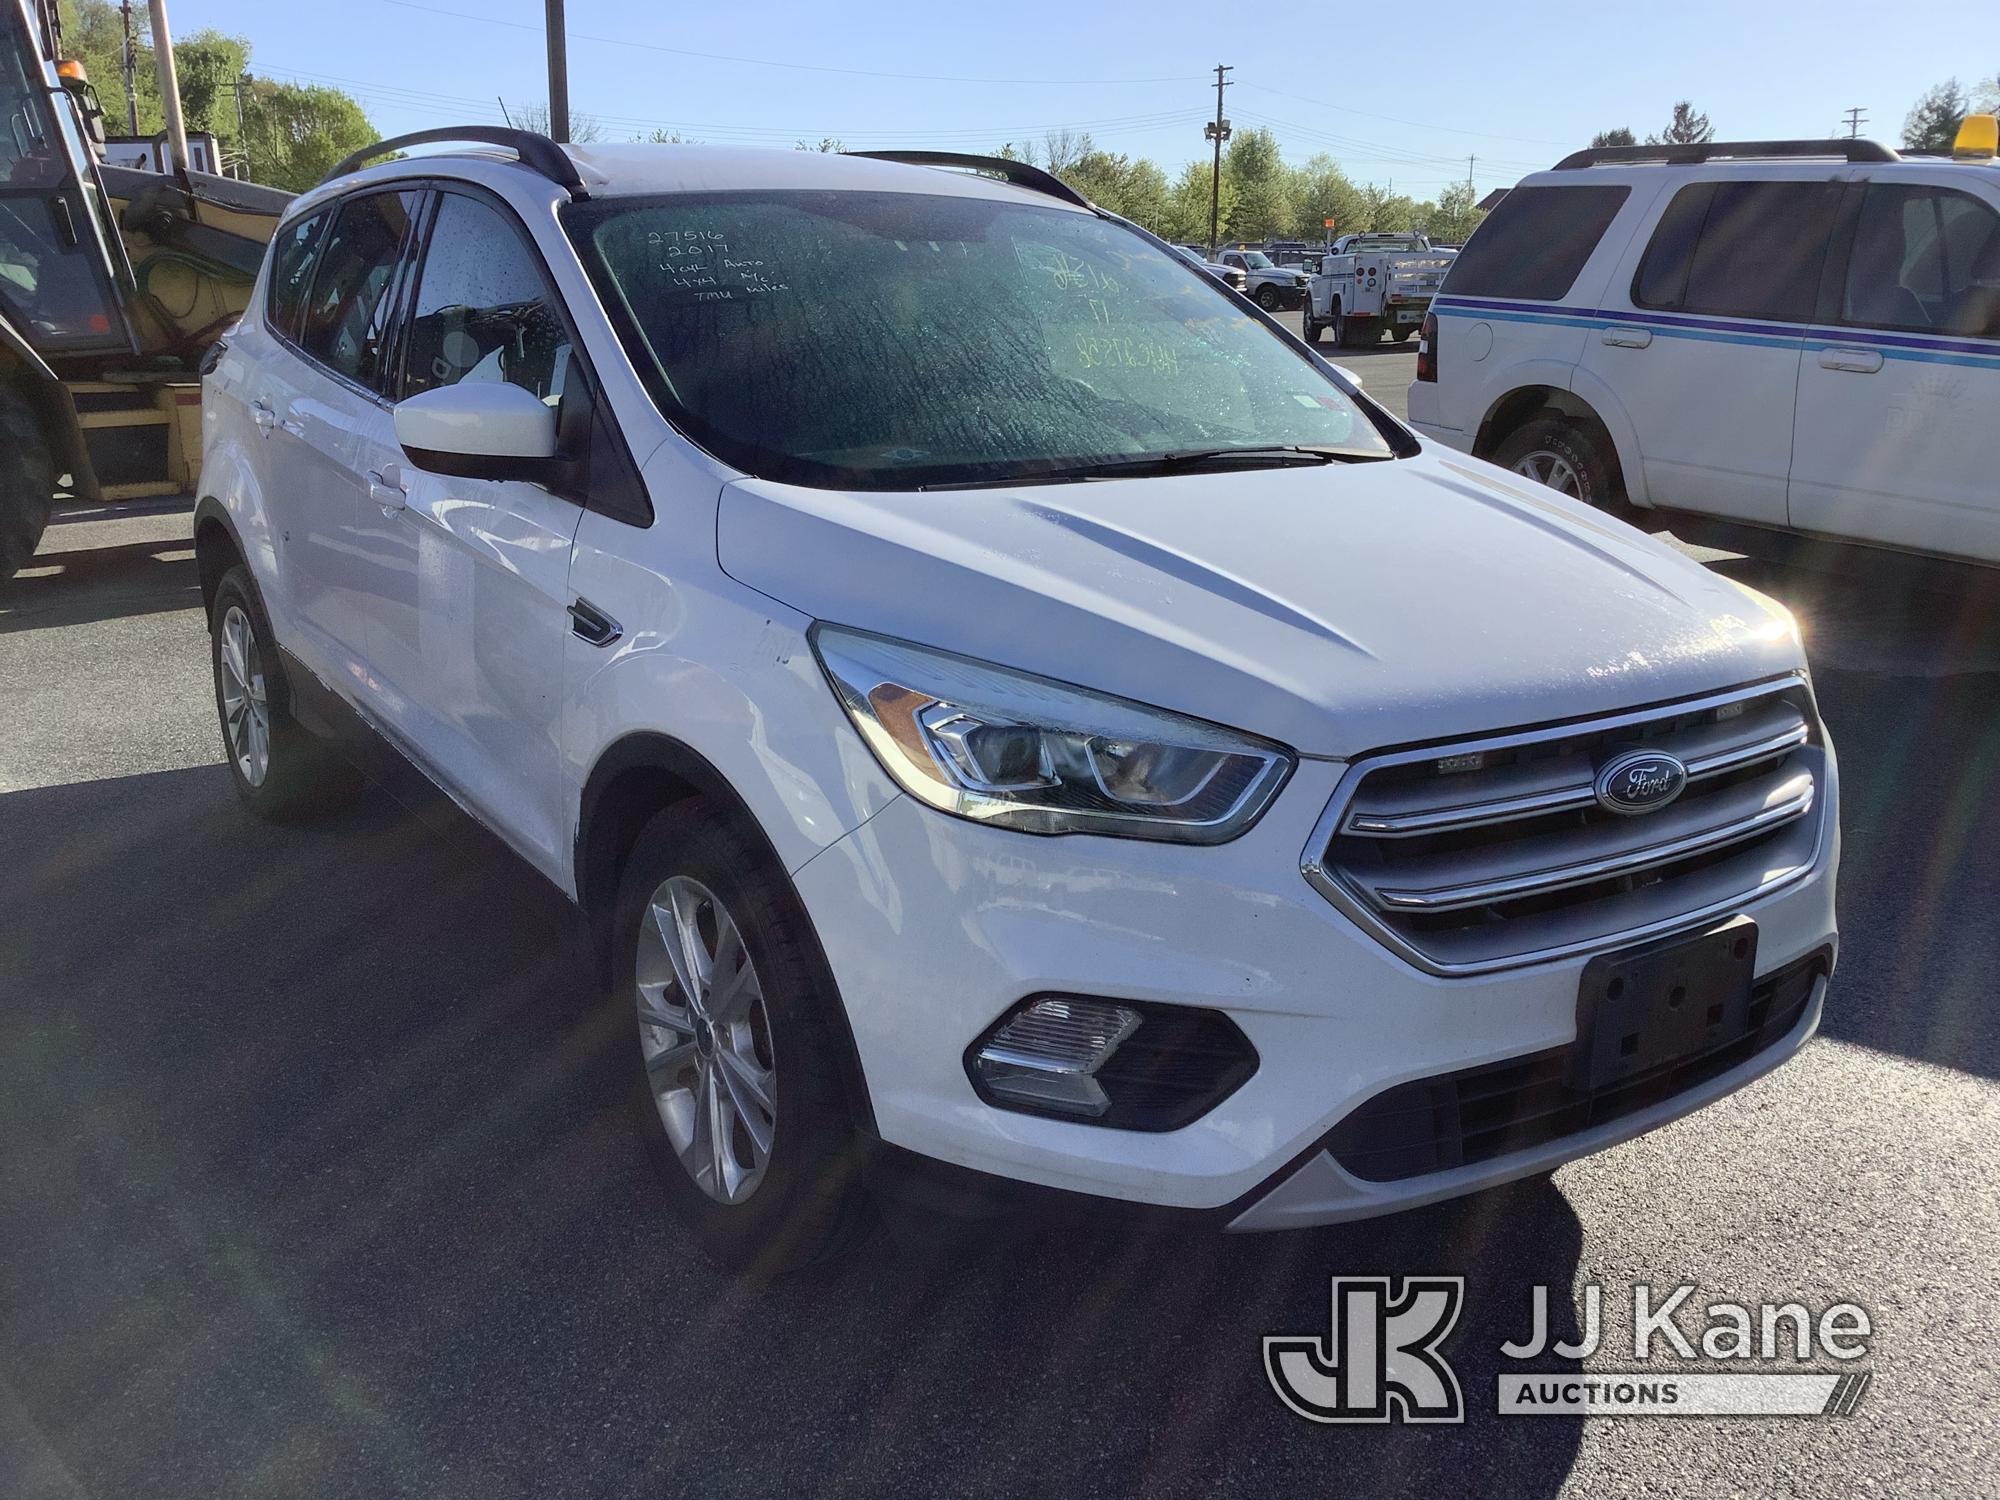 (Chester Springs, PA) 2017 Ford Escape 4x4 4-Door Sport Utility Vehicle Not Running, Condition Unkno